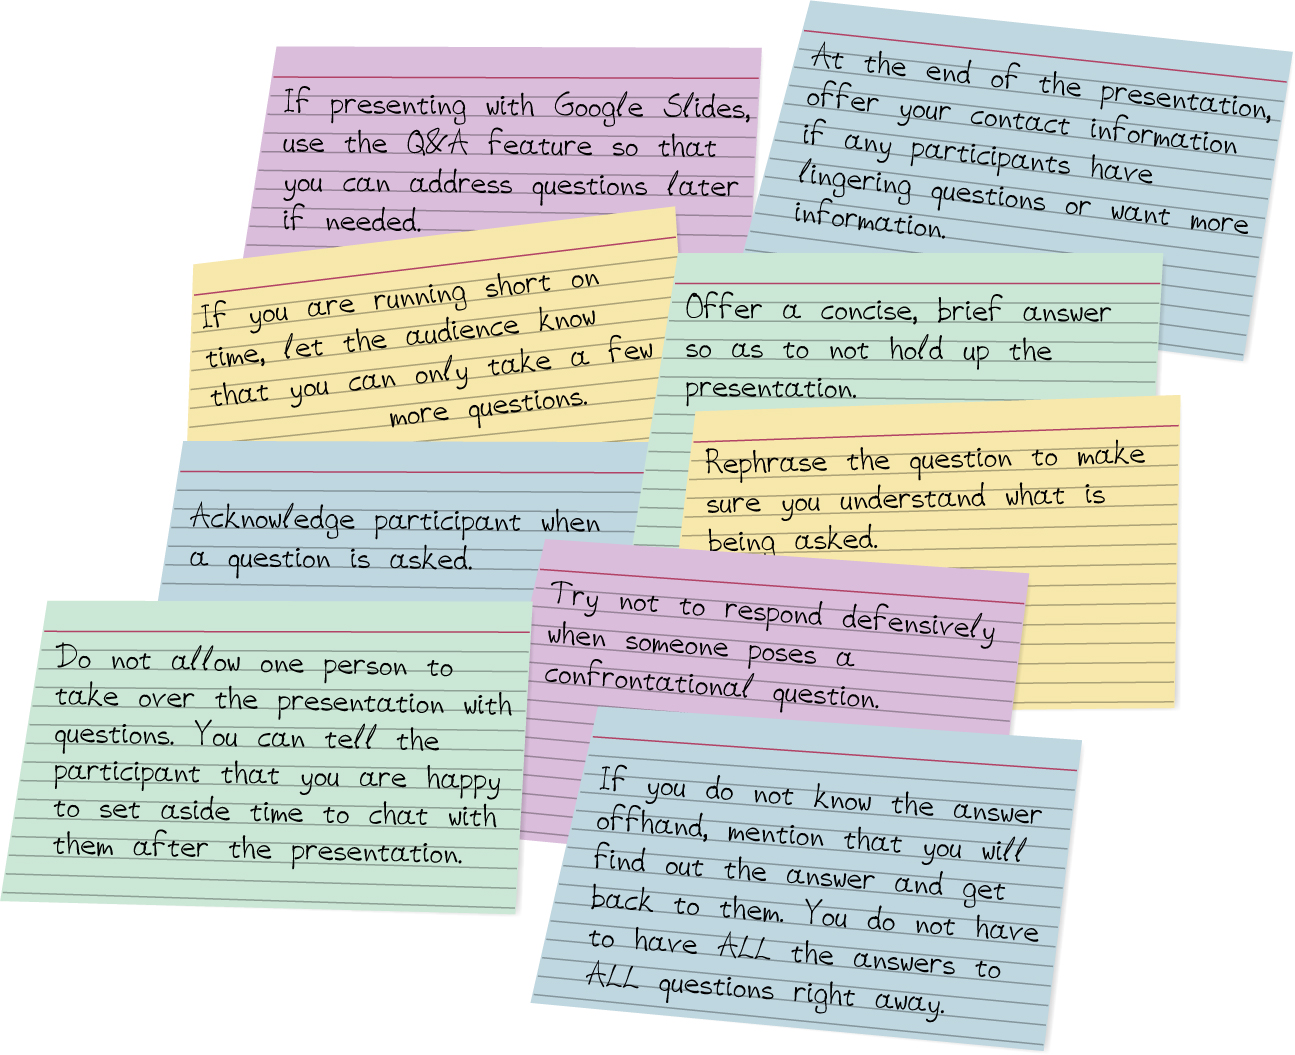 A collage of colored note cards with hand-written notes on them is shown.